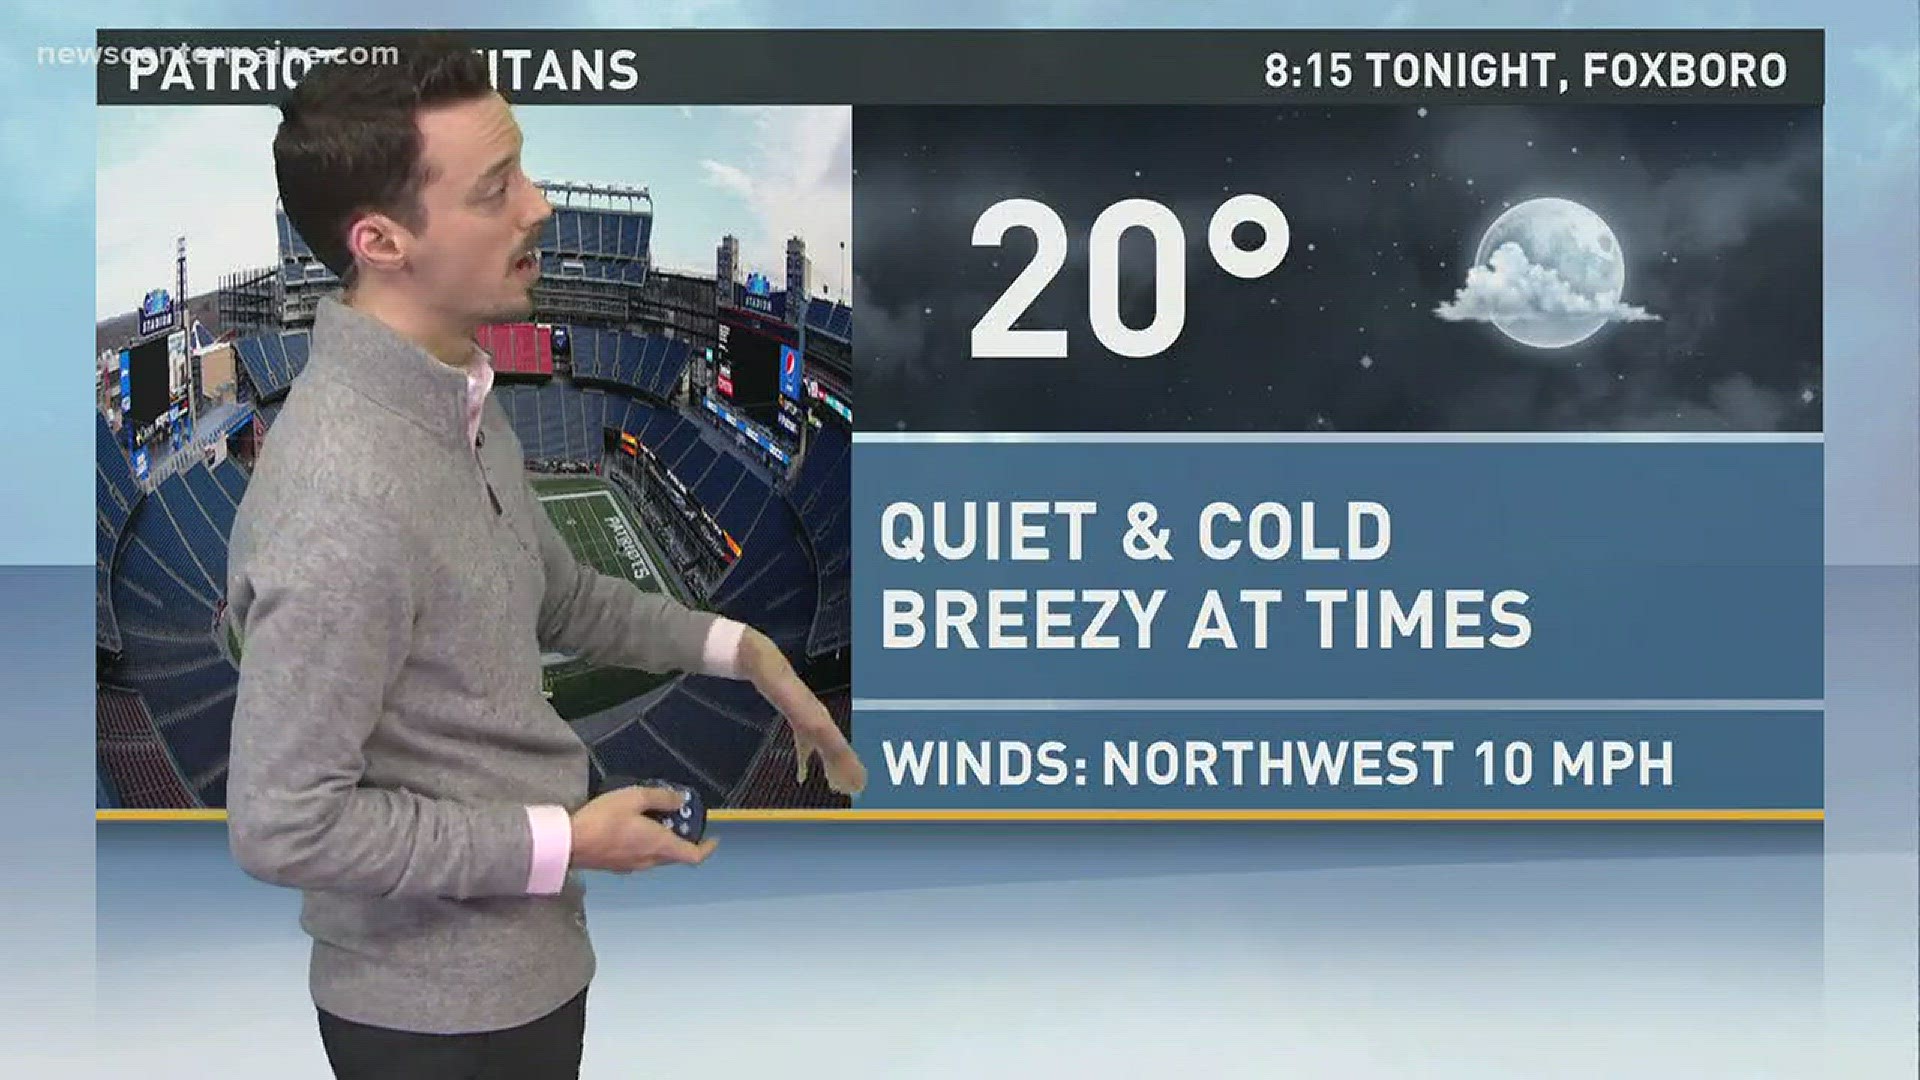 Patriots vs Titans tonight from Foxboro. What kind of weather will Jess, Chris and Emily encounter?